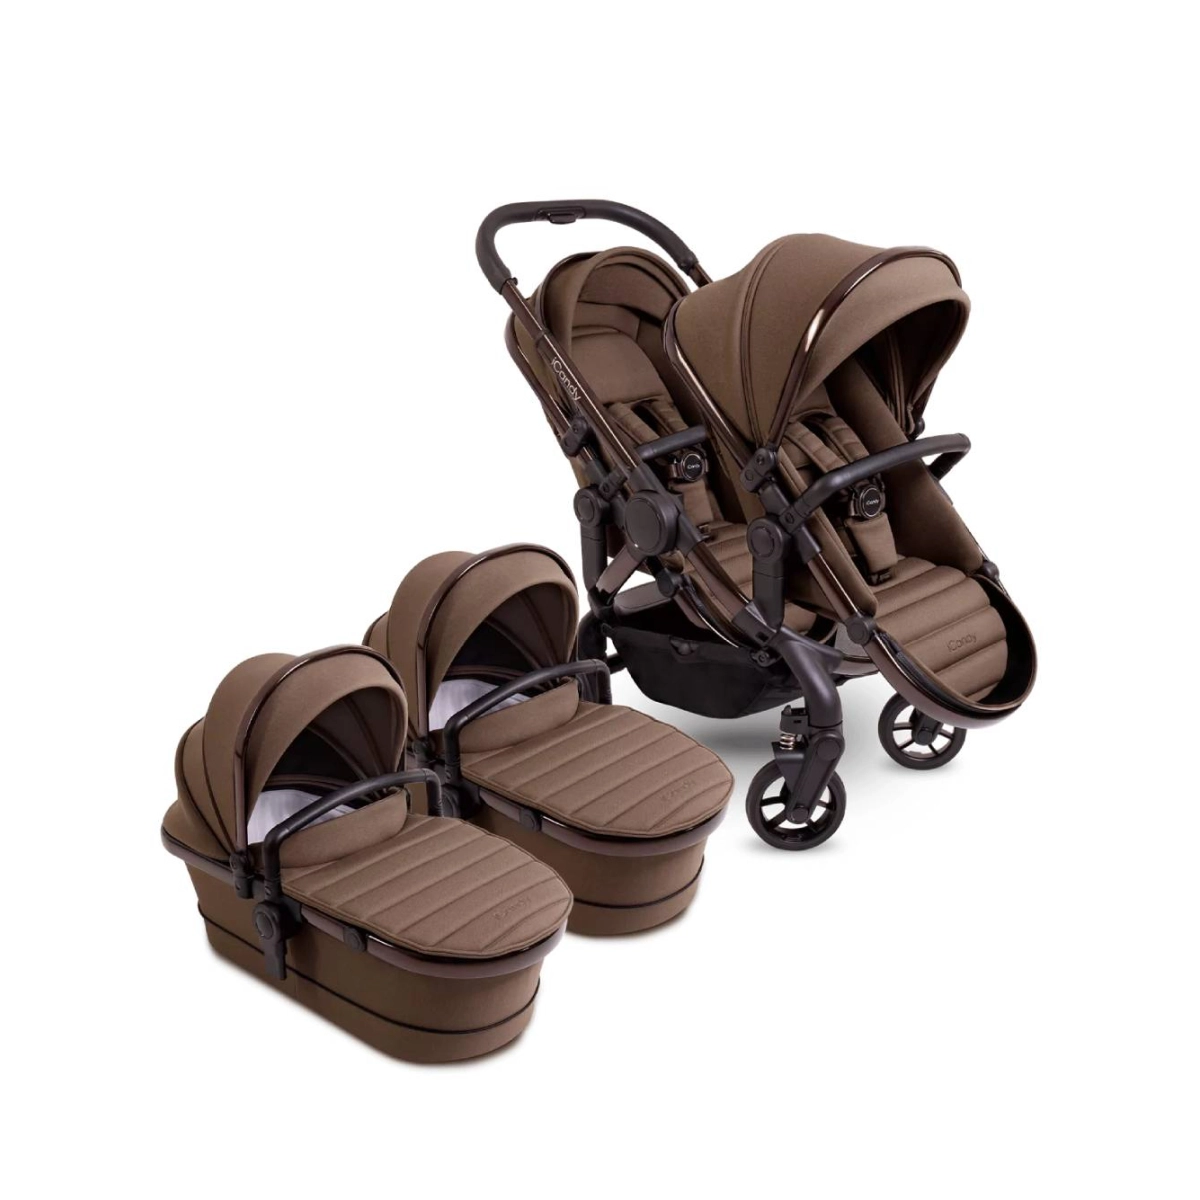 Image of iCandy Peach 7 Twin Pushchair Bundle-Coco